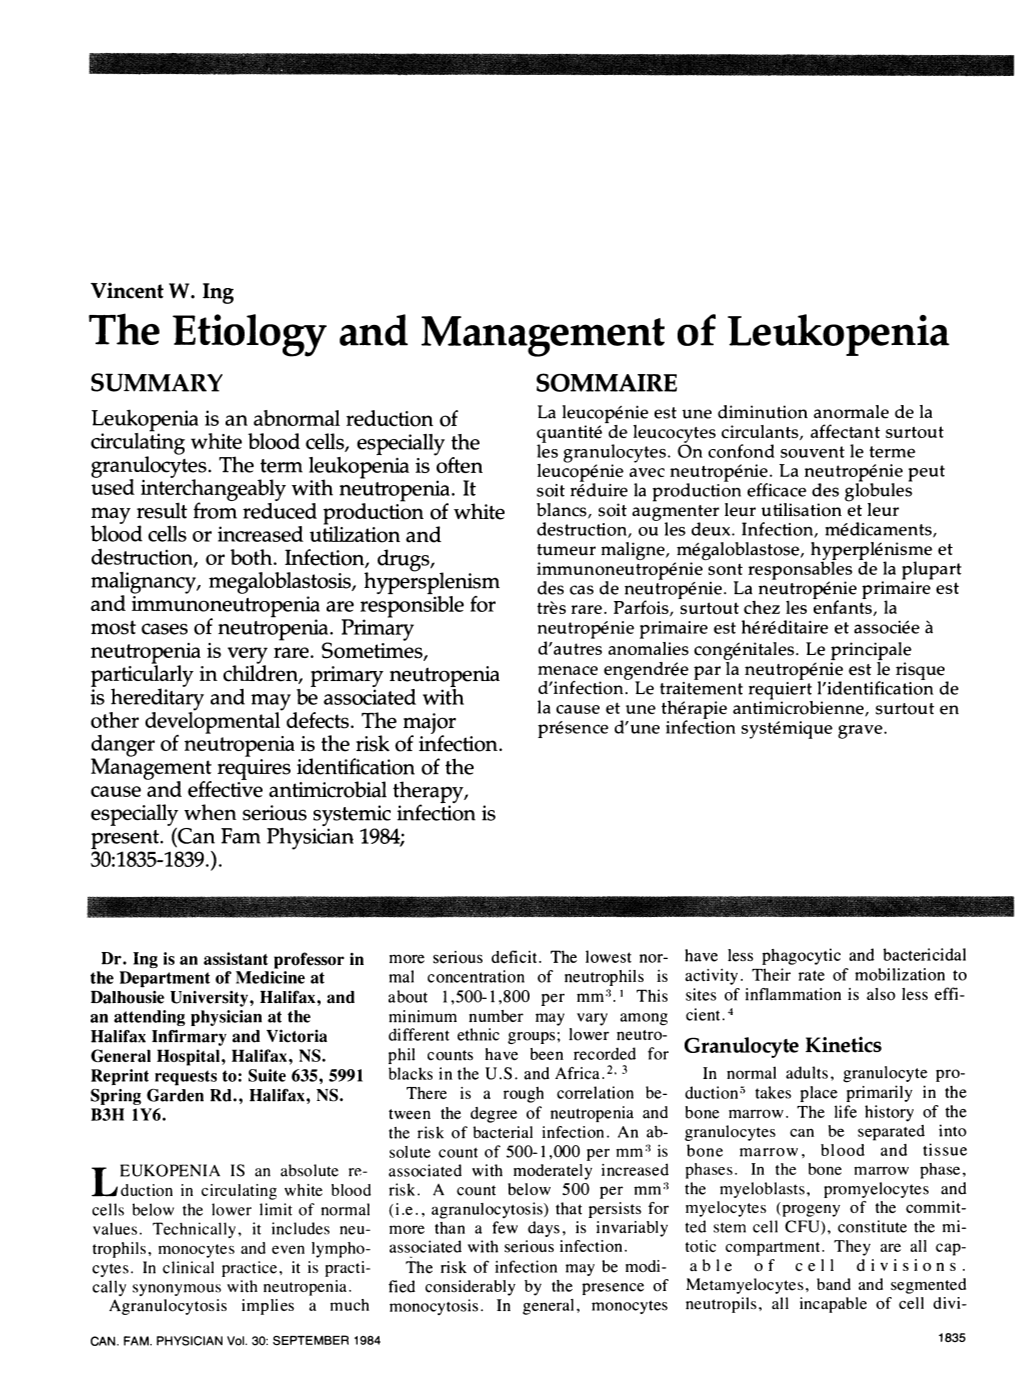 The Etiology and Management of Leukopenia